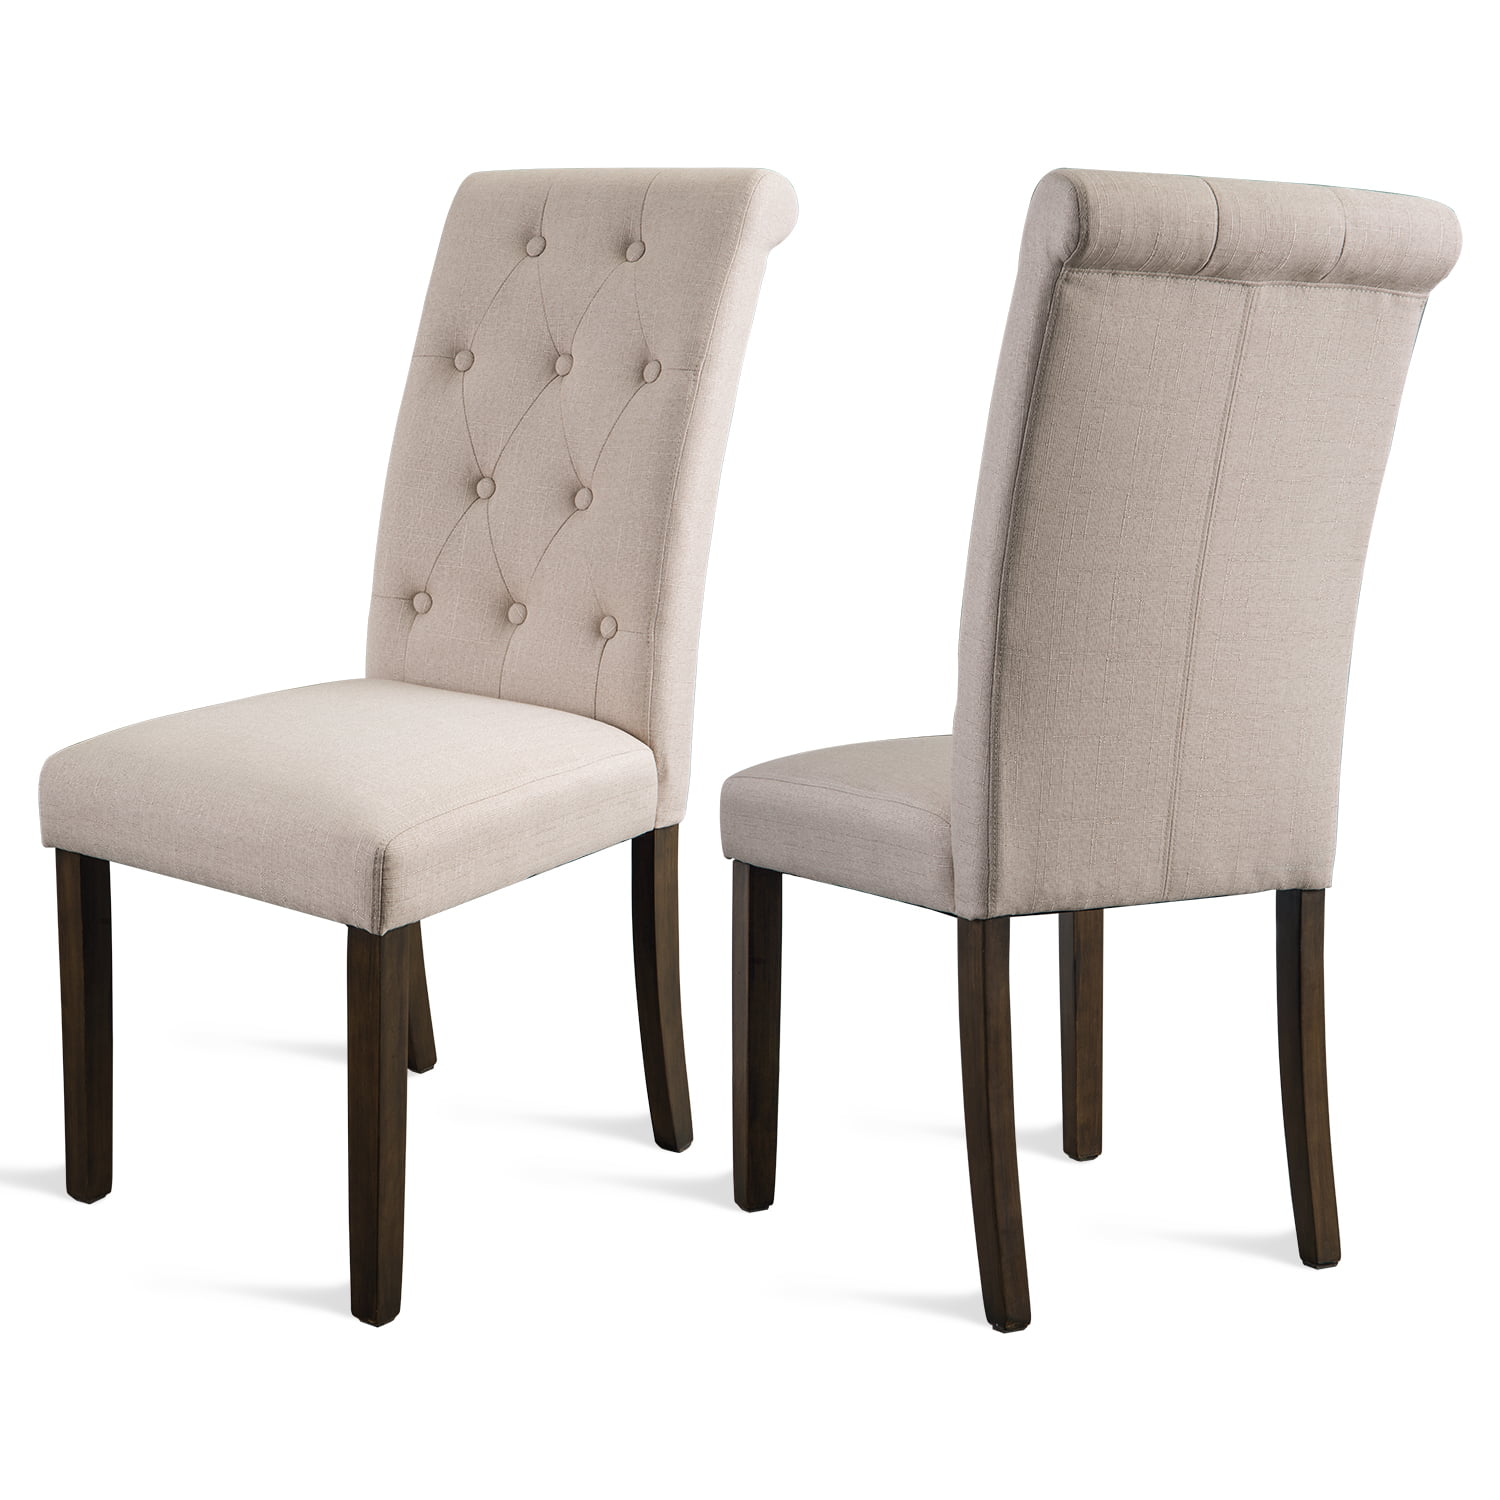 Parsons Tufted Dining Room Chairs, Tufted Dining Room Chairs Set Of 2